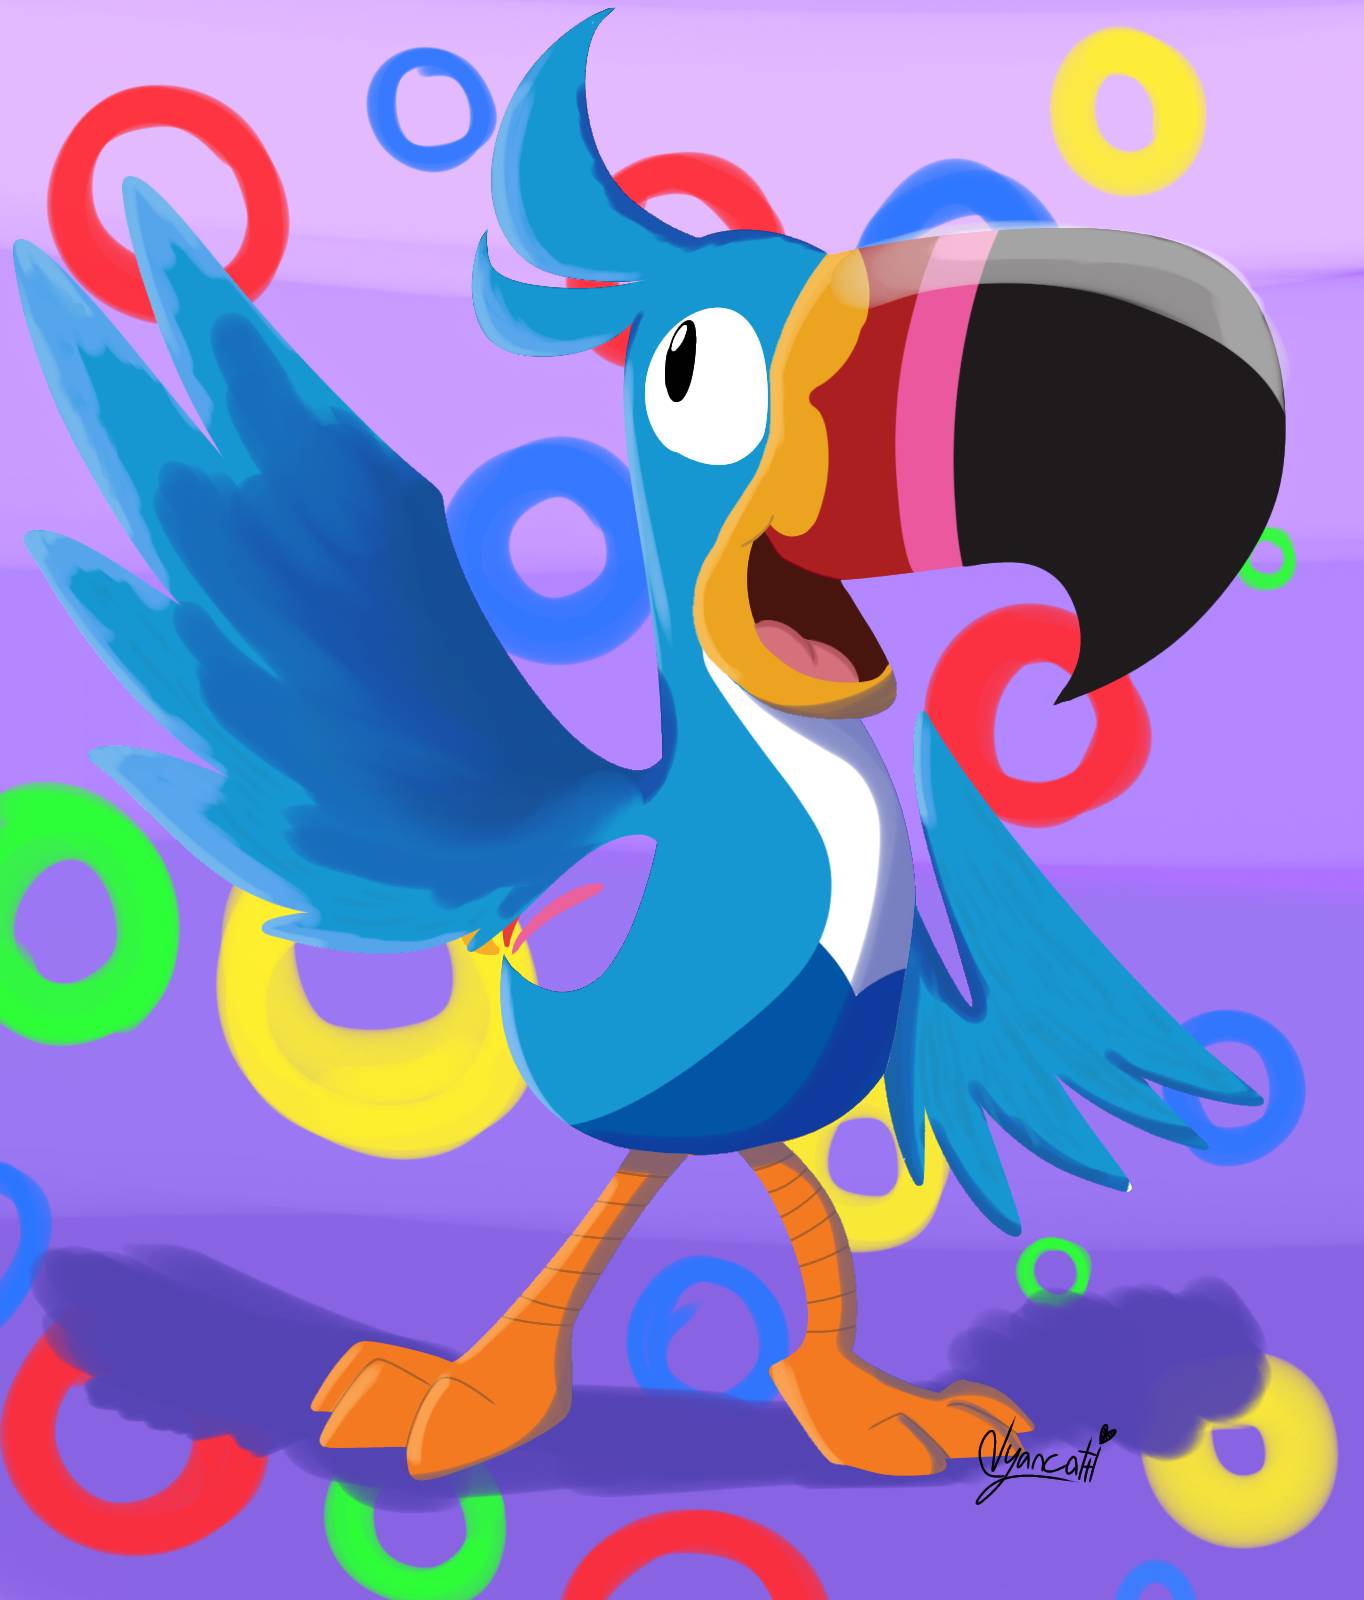 Froot Loops Changed The Look Of Toucan Sam